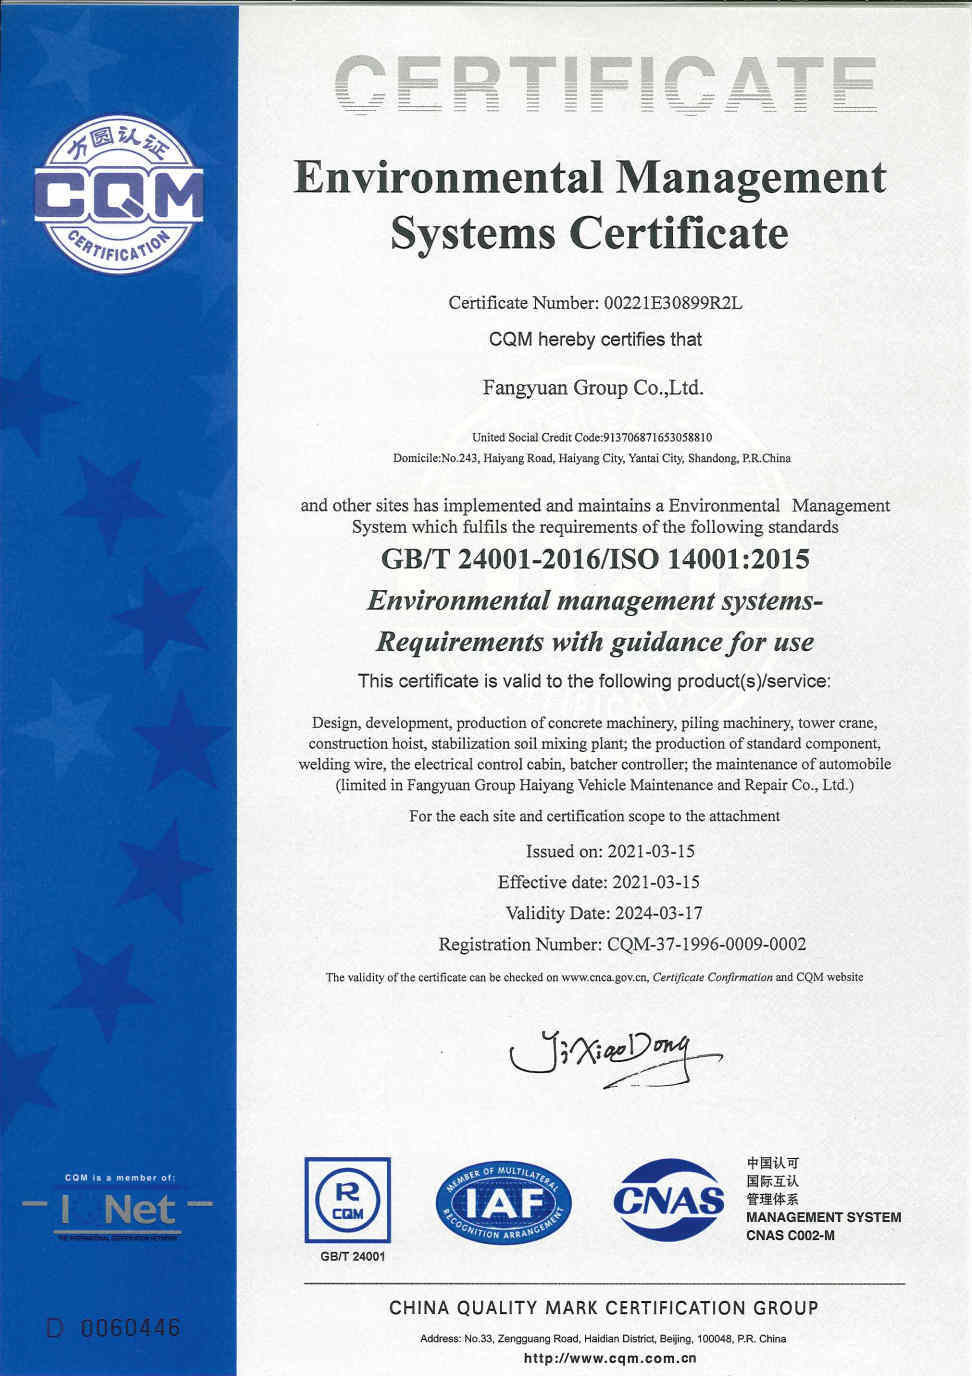 Occupational Health and Safety Management Systems Certifiate